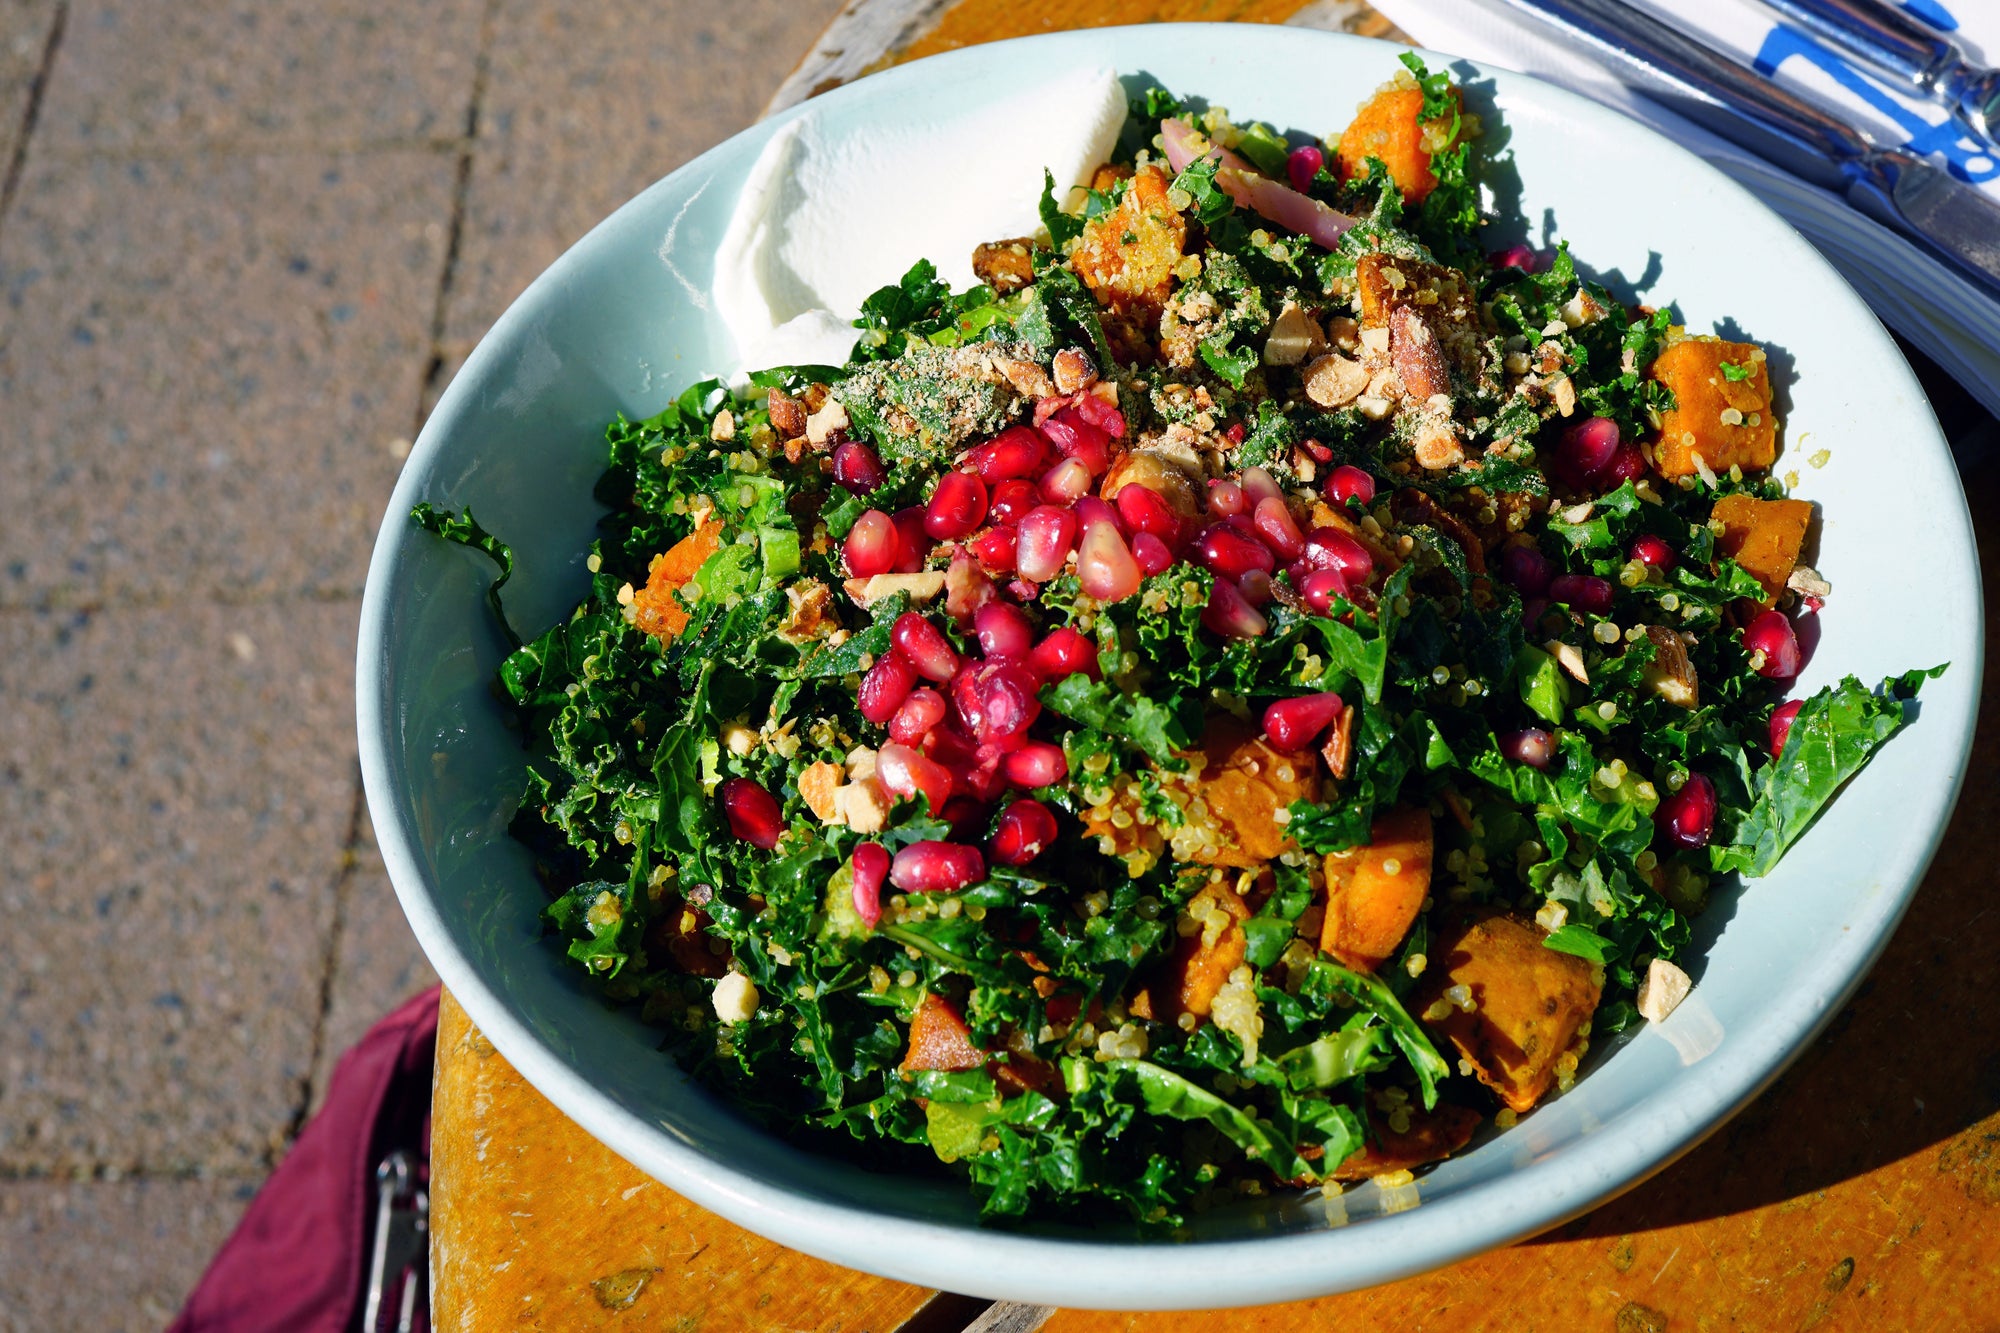 Winter Kale Salad with Almond Butter Dressing